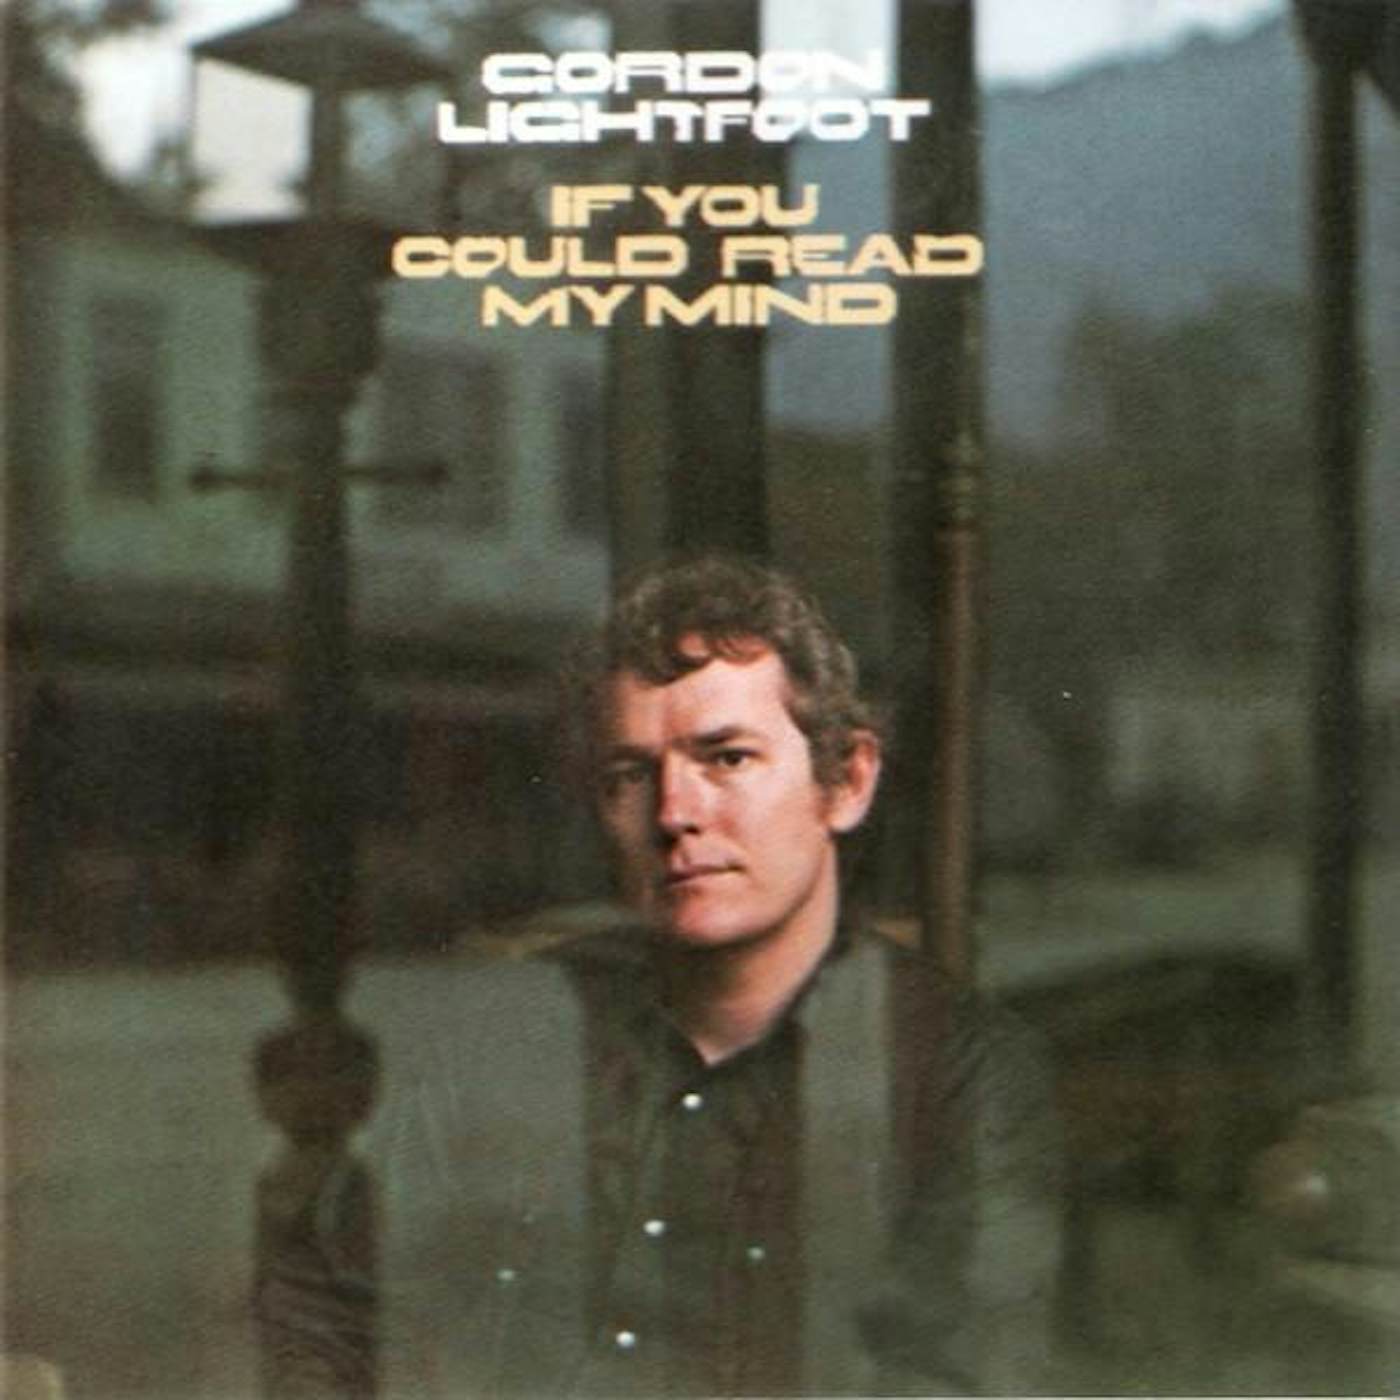 Gordon Lightfoot IF YOU COULD READ MY MIND CD